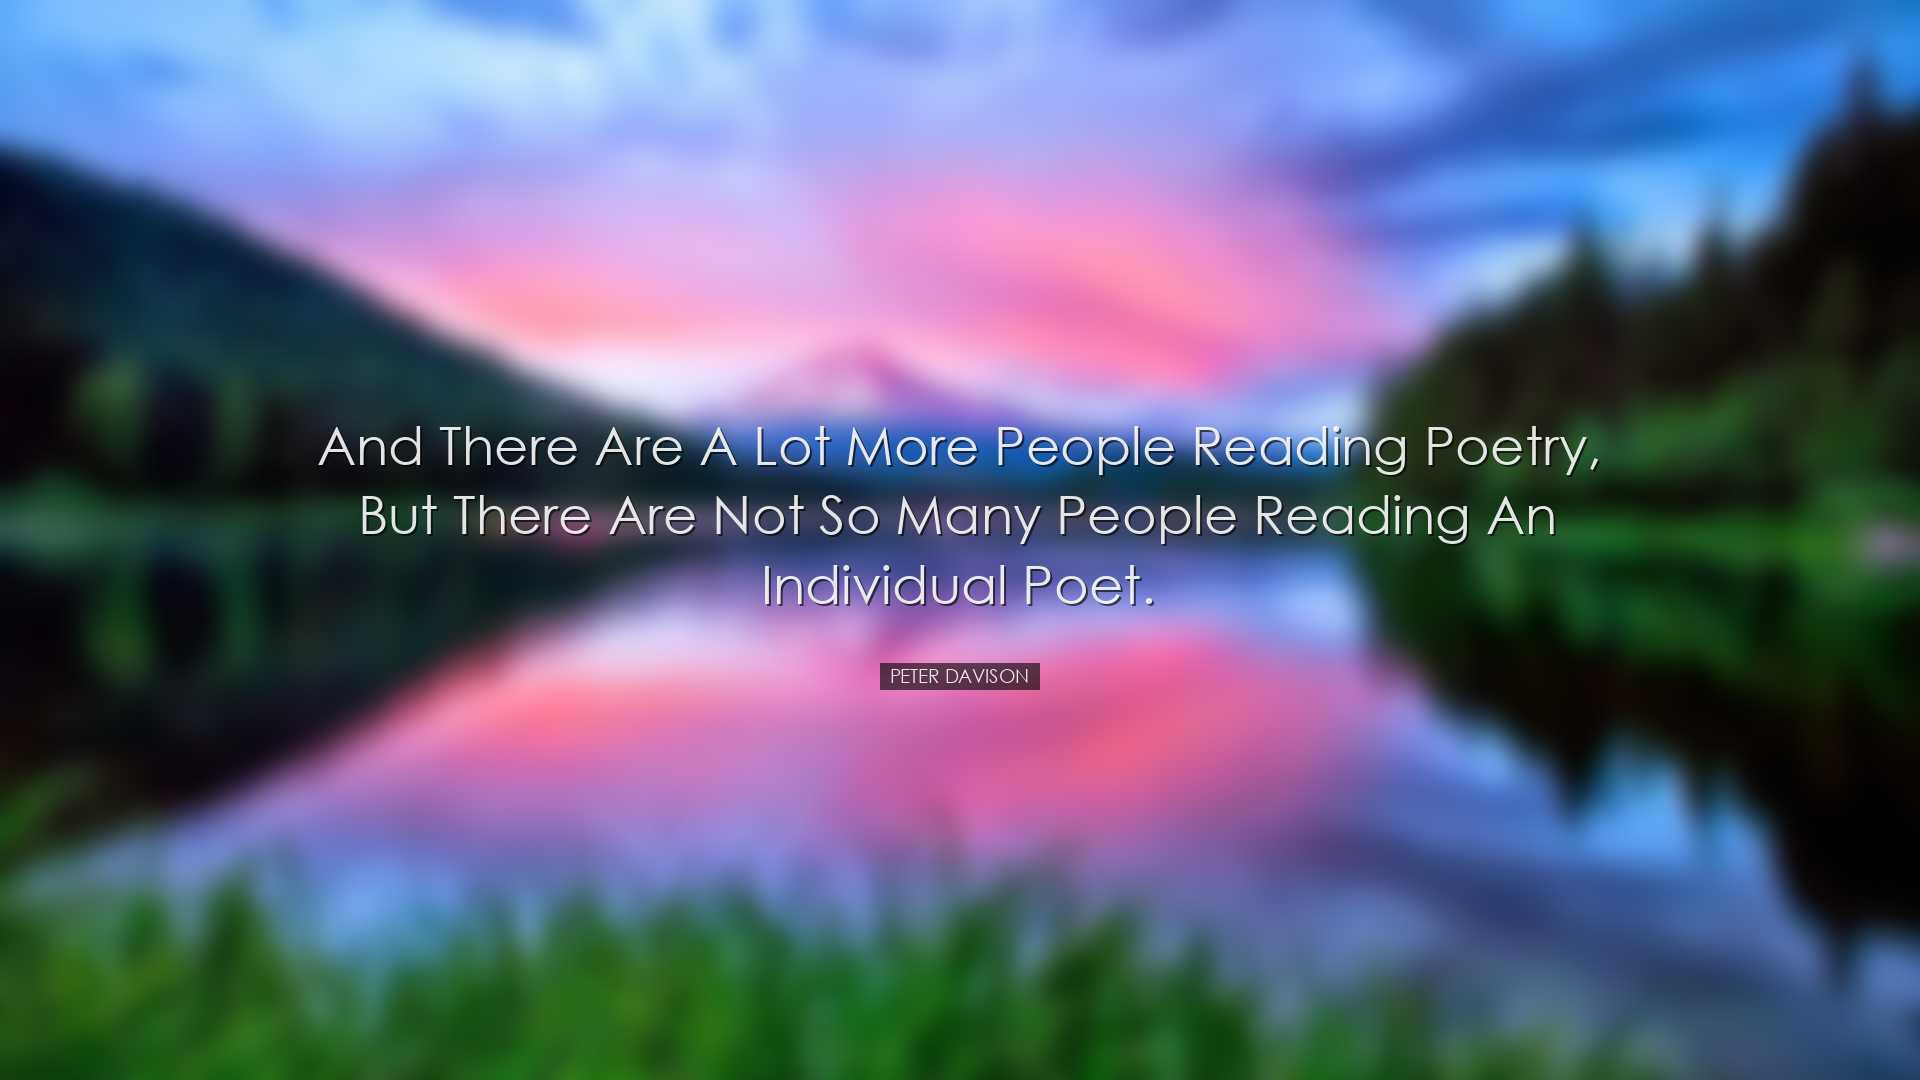 And there are a lot more people reading poetry, but there are not